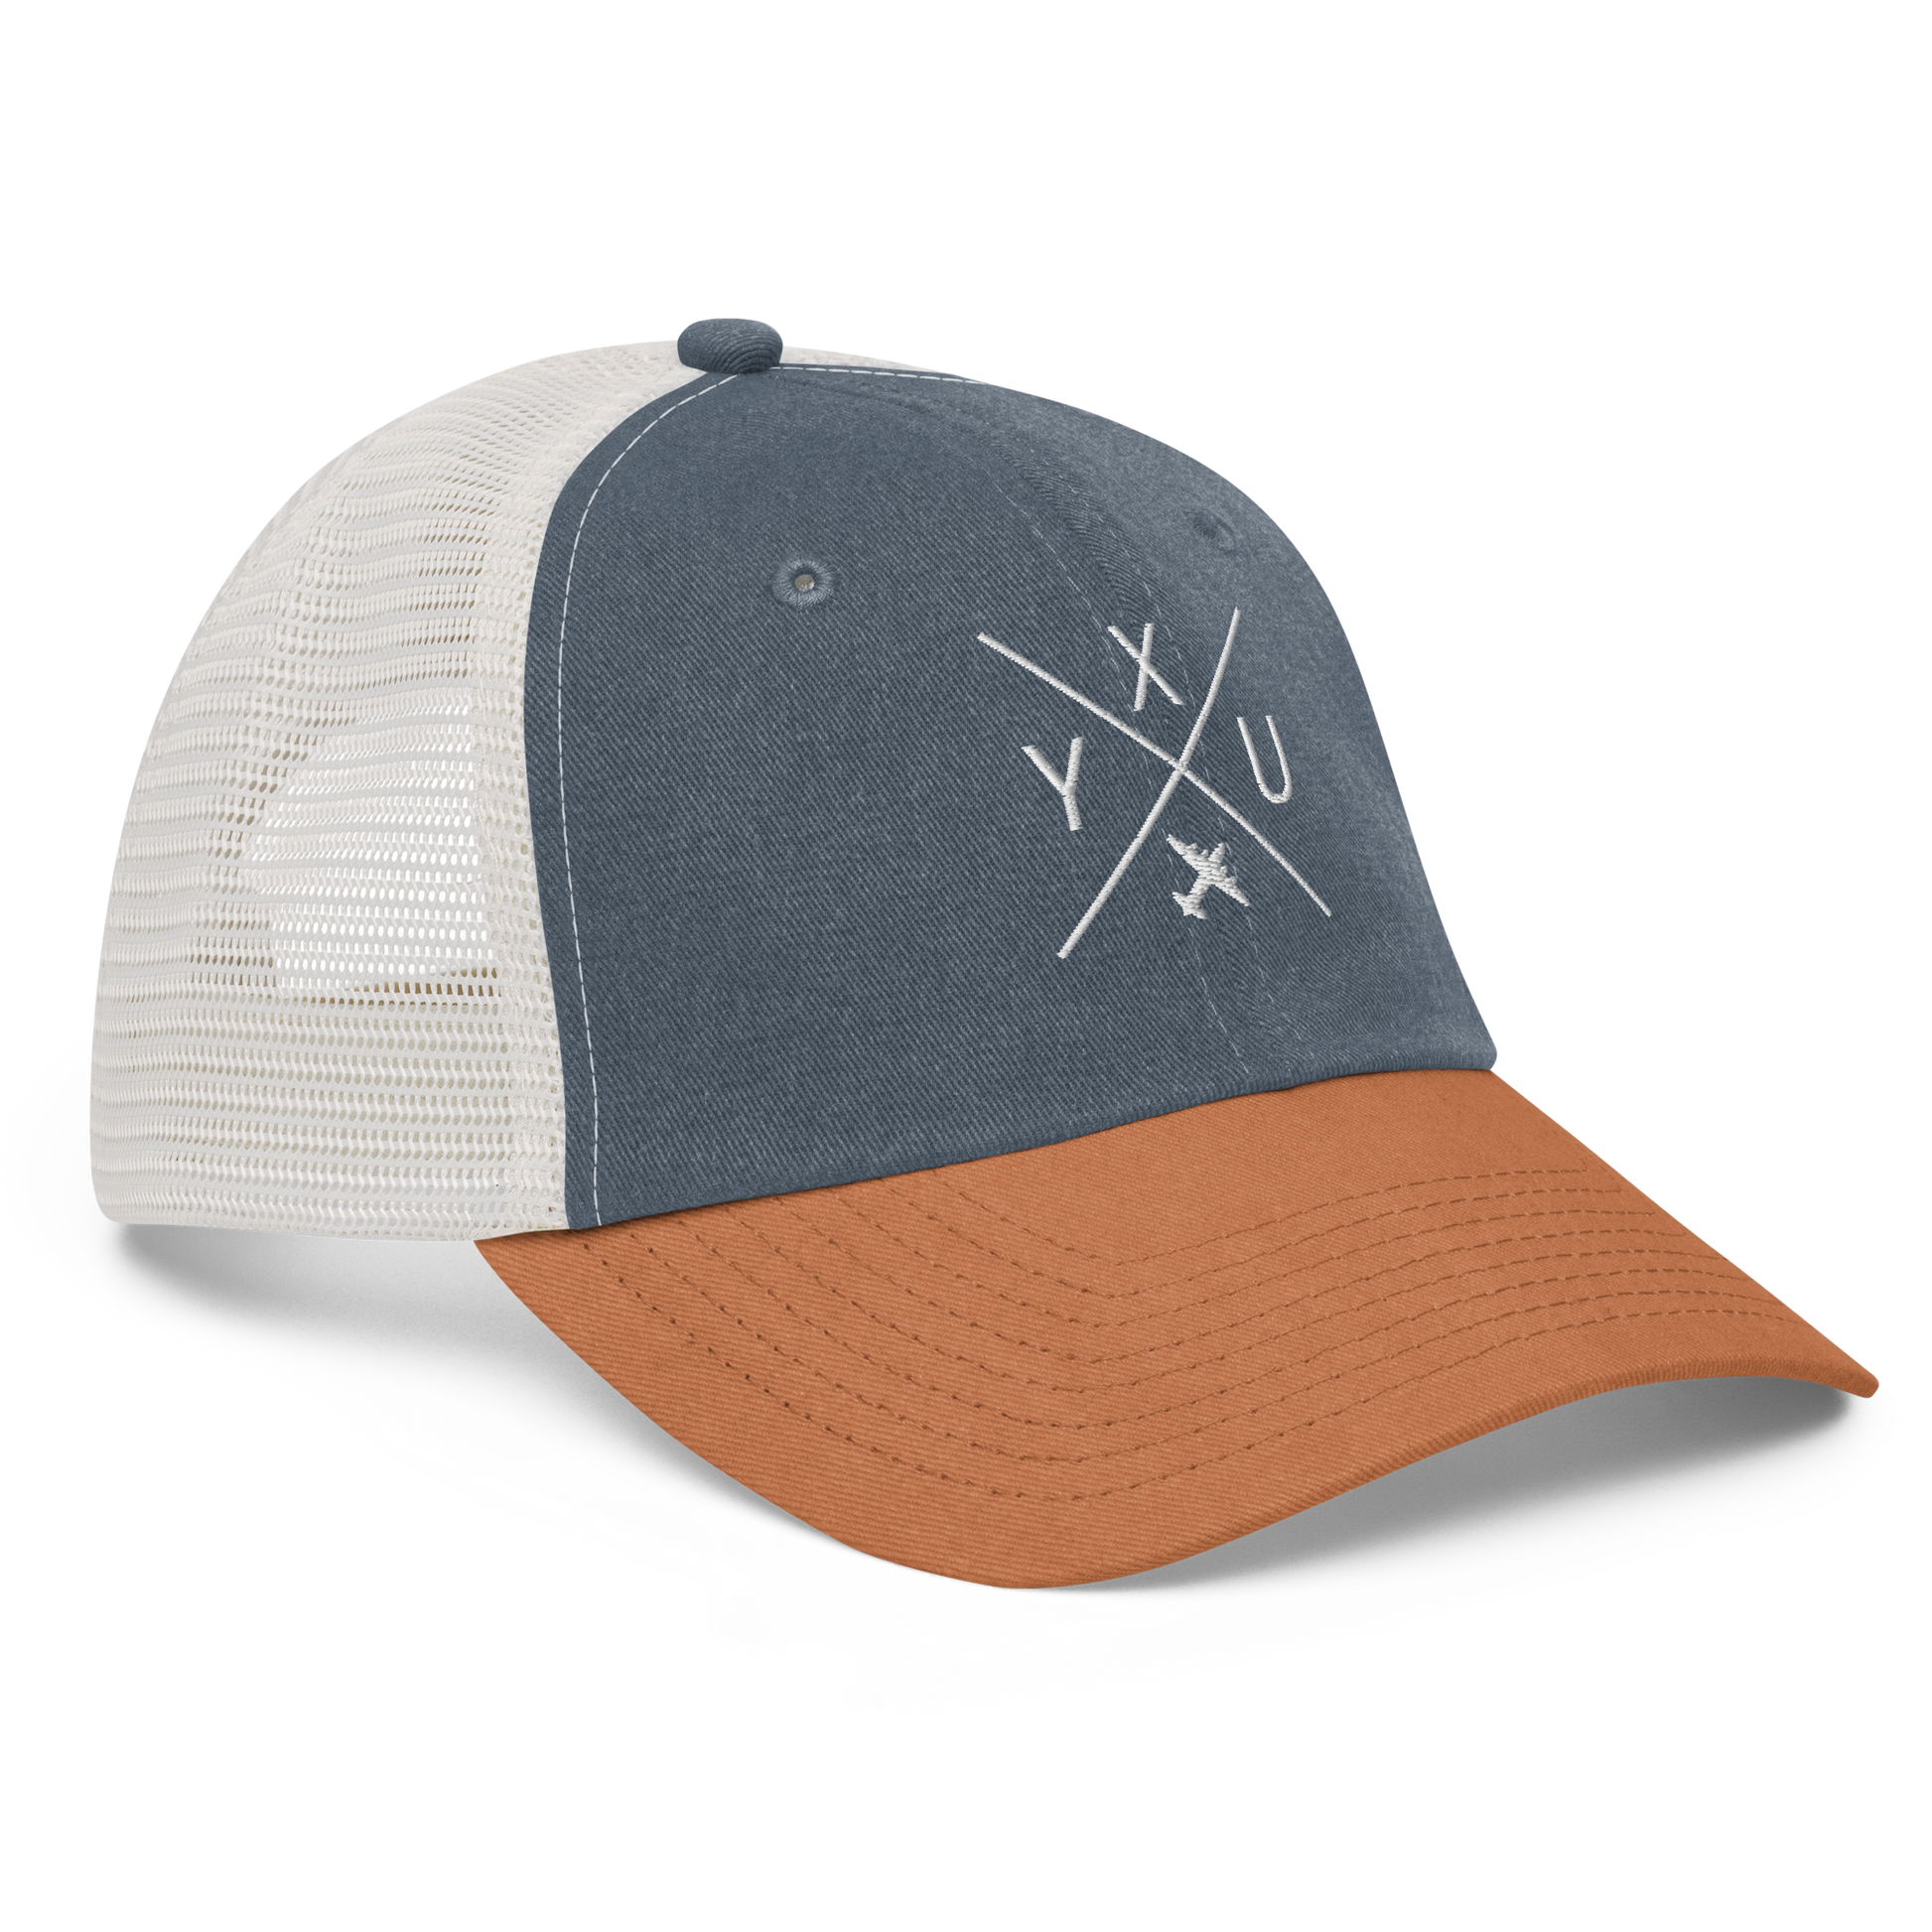 YHM Designs - YXU London Pigment-Dyed Trucker Cap - Crossed-X Design with Airport Code and Vintage Propliner - White Embroidery - Image 16